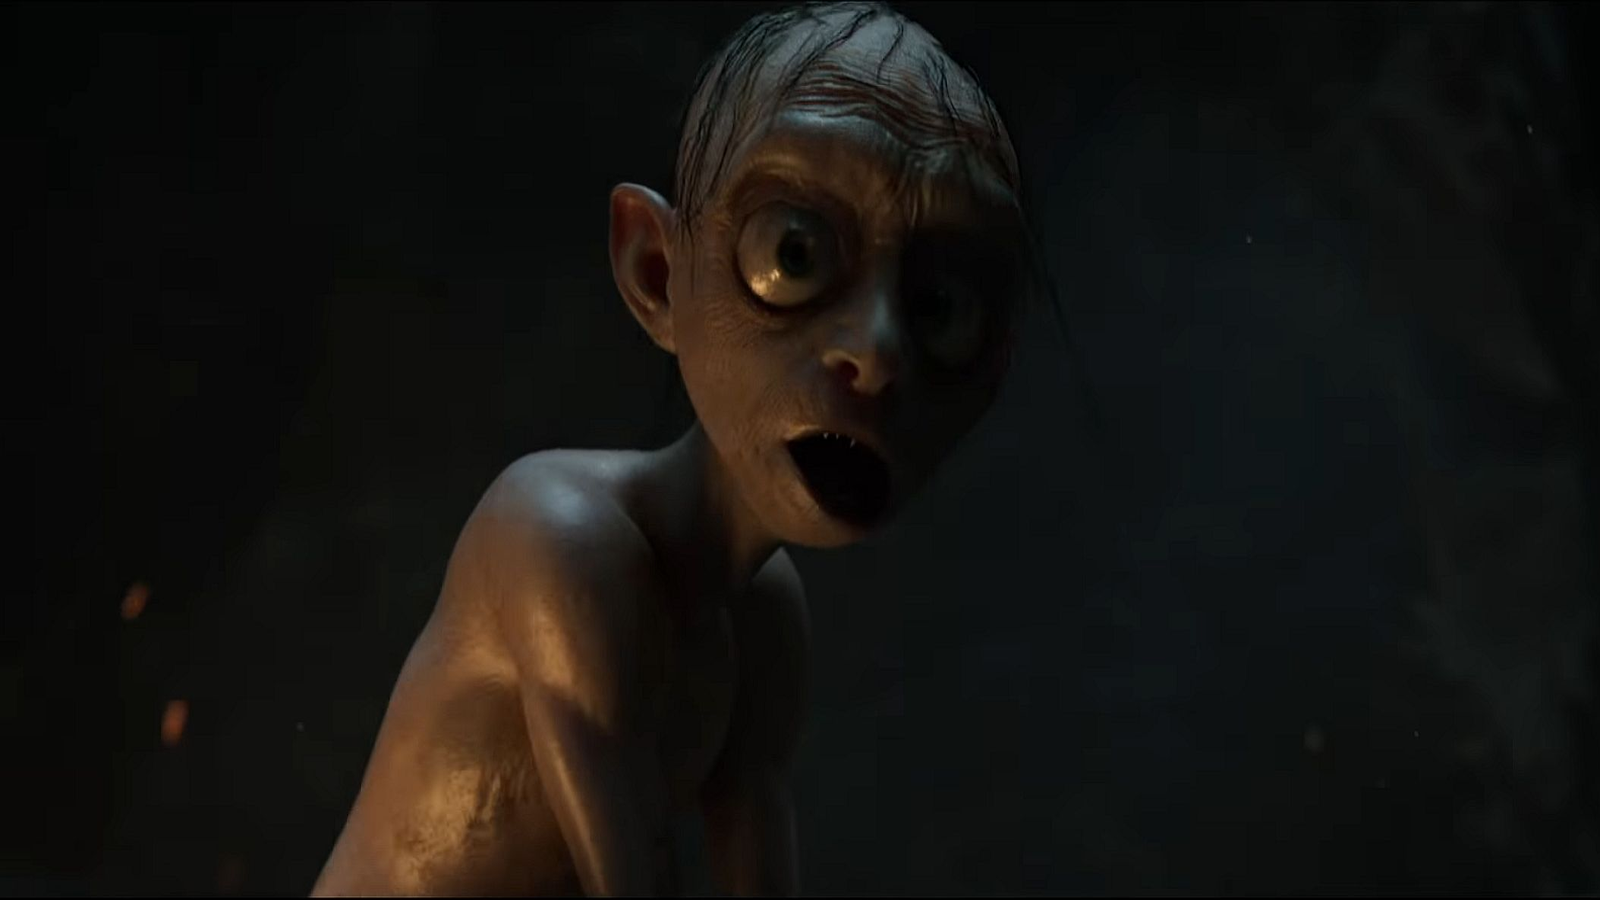 The Lord of the Rings: Gollum is coming this September